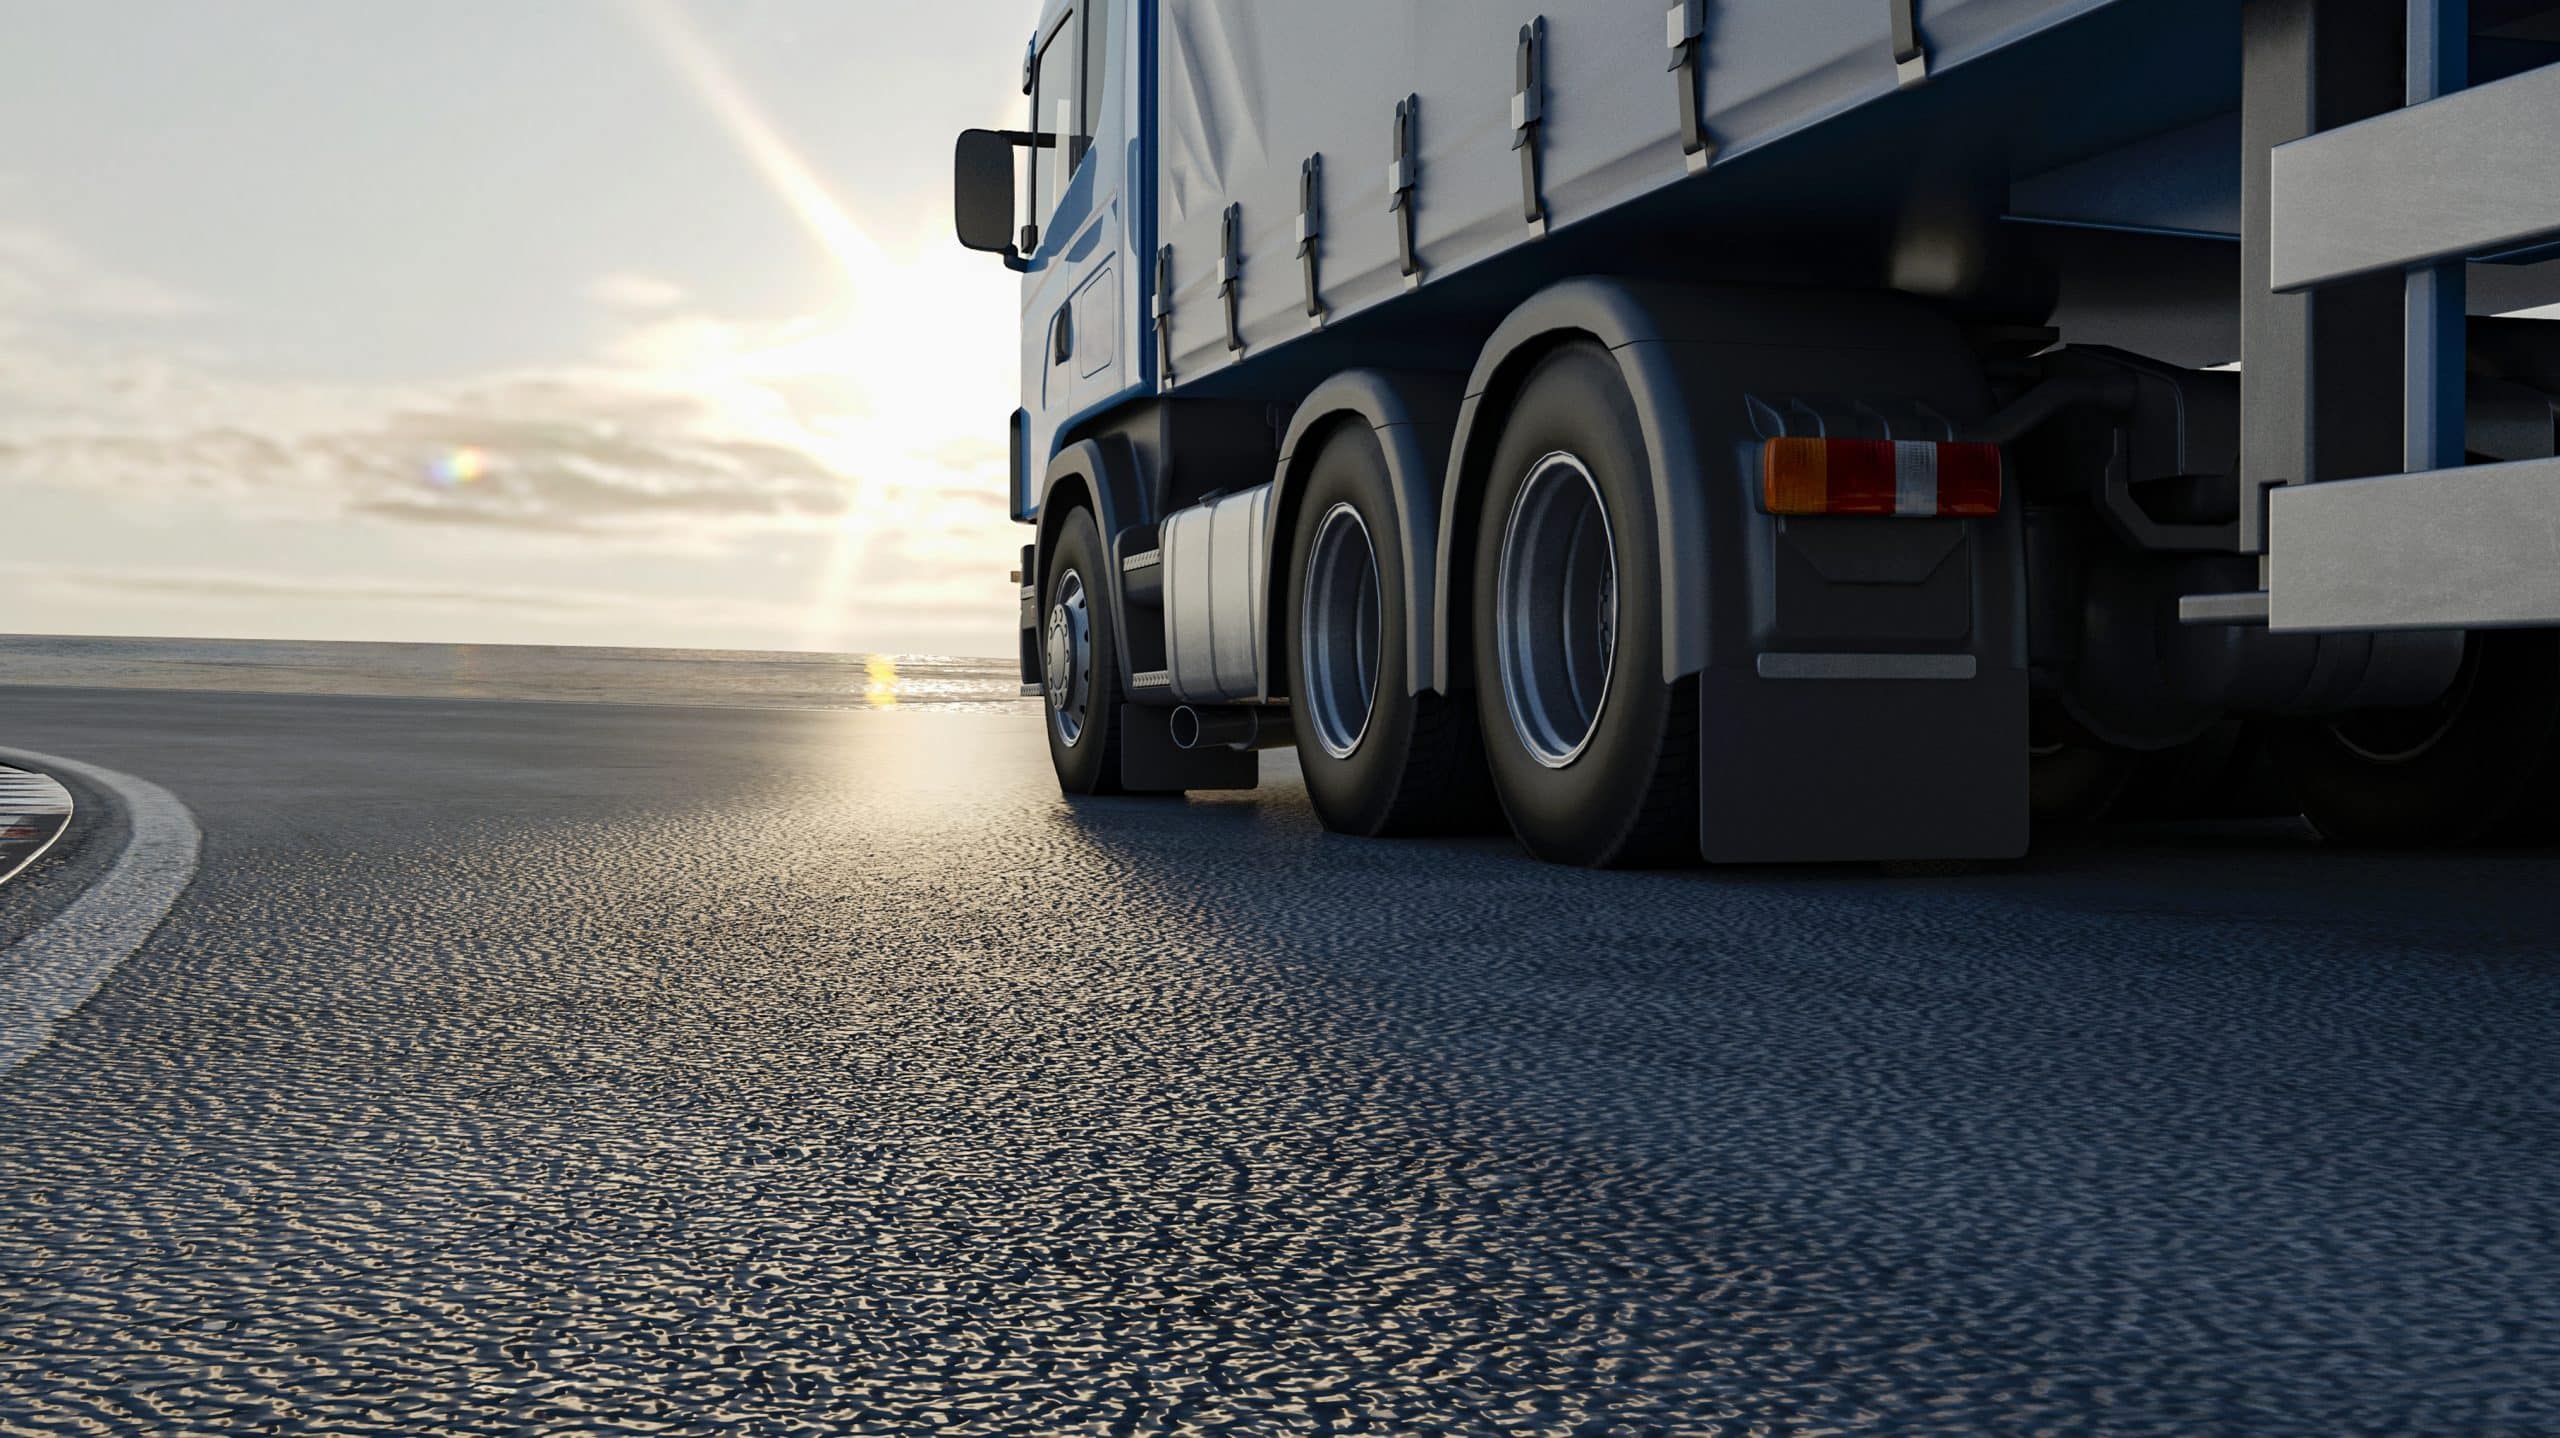 A close-up view of a semi-truck traveling on a highway at sunset, emphasizing the wheels and side of the trailer.